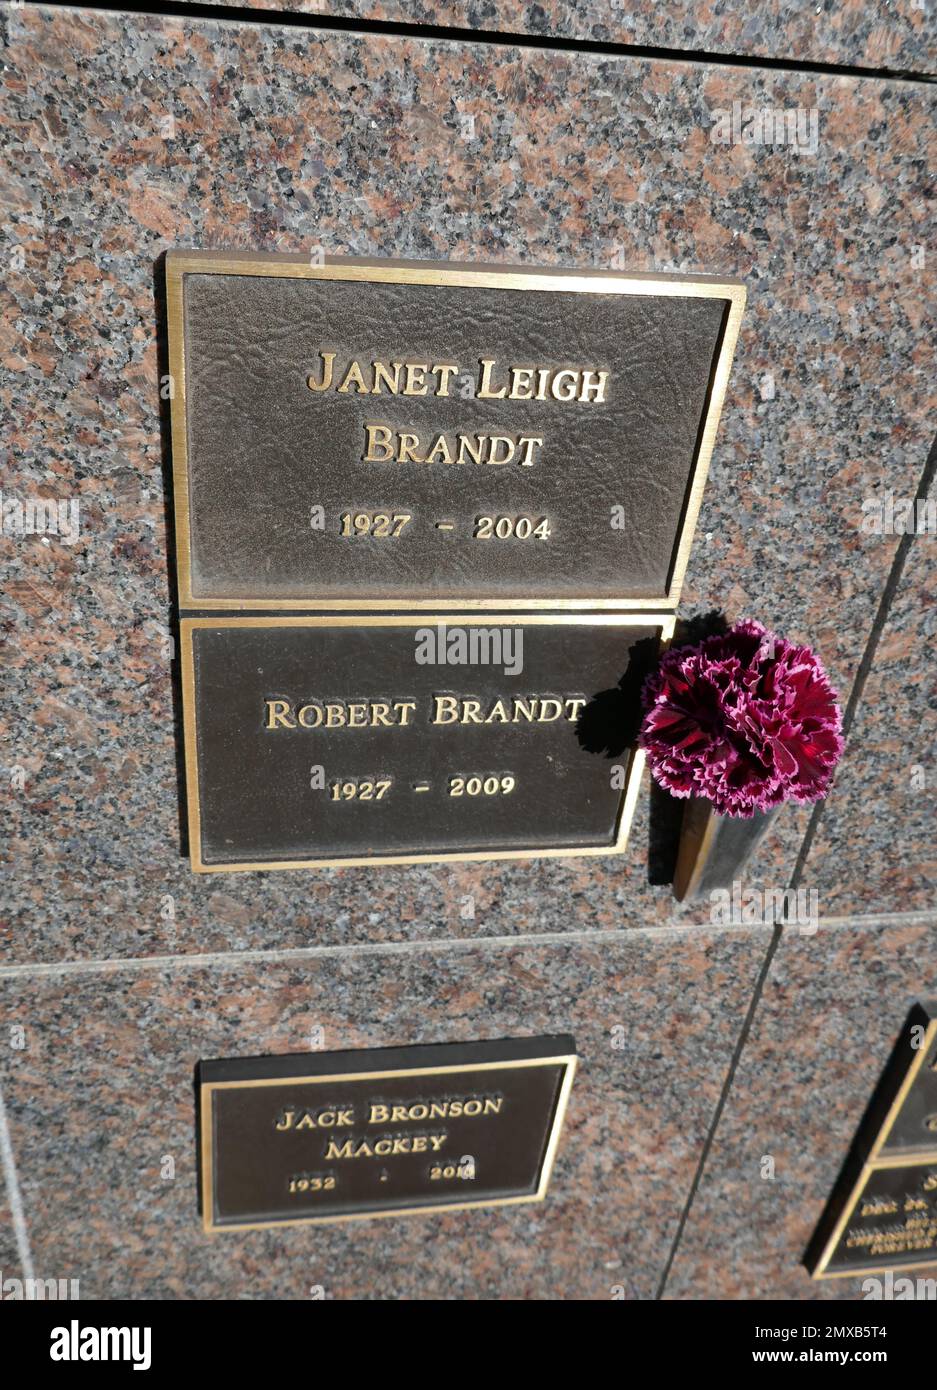 Los Angeles, California, USA 31st January 2023 A general view of atmosphere Actress Janet Leigh's Grave at Pierce Brothers Westwood Village Memorial Park Cemetery on January 31, 2023 in Los Angeles, California, USA. Photo by Barry King/Alamy Stock Photo Stock Photo